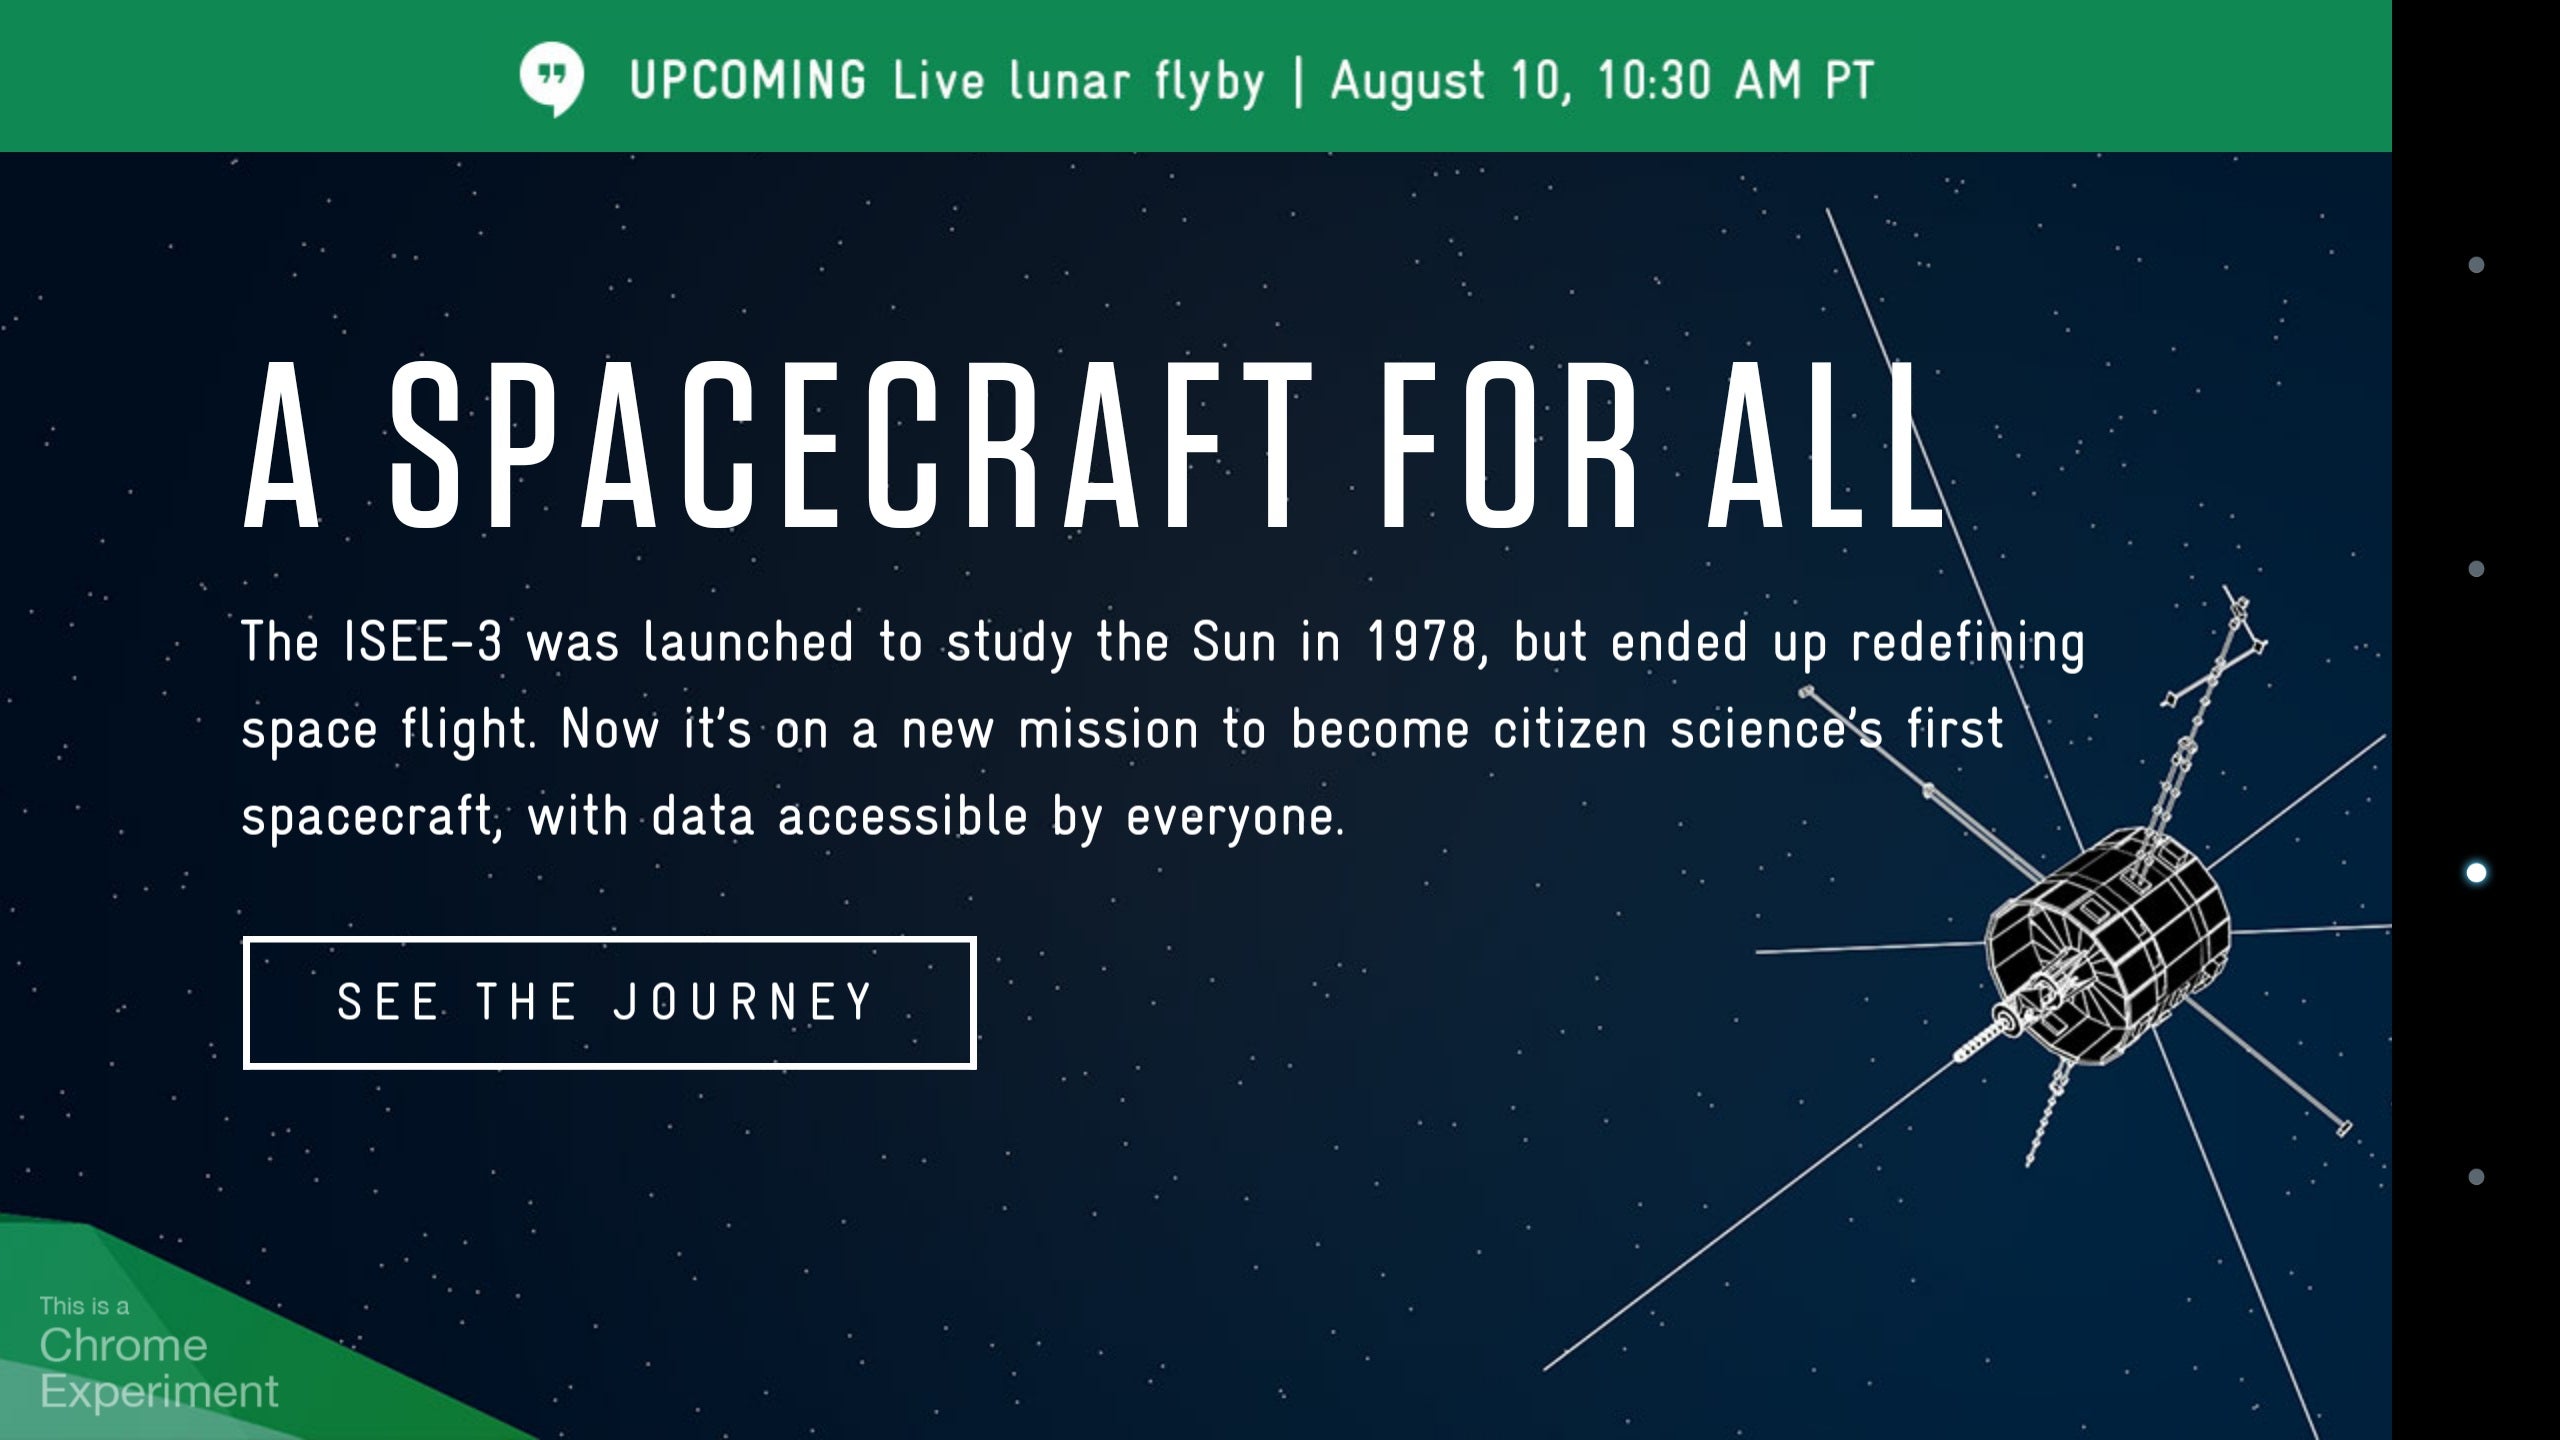 The latest Chrome experiment: track an abandoned NASA satellite, lunar flyby on August 10th